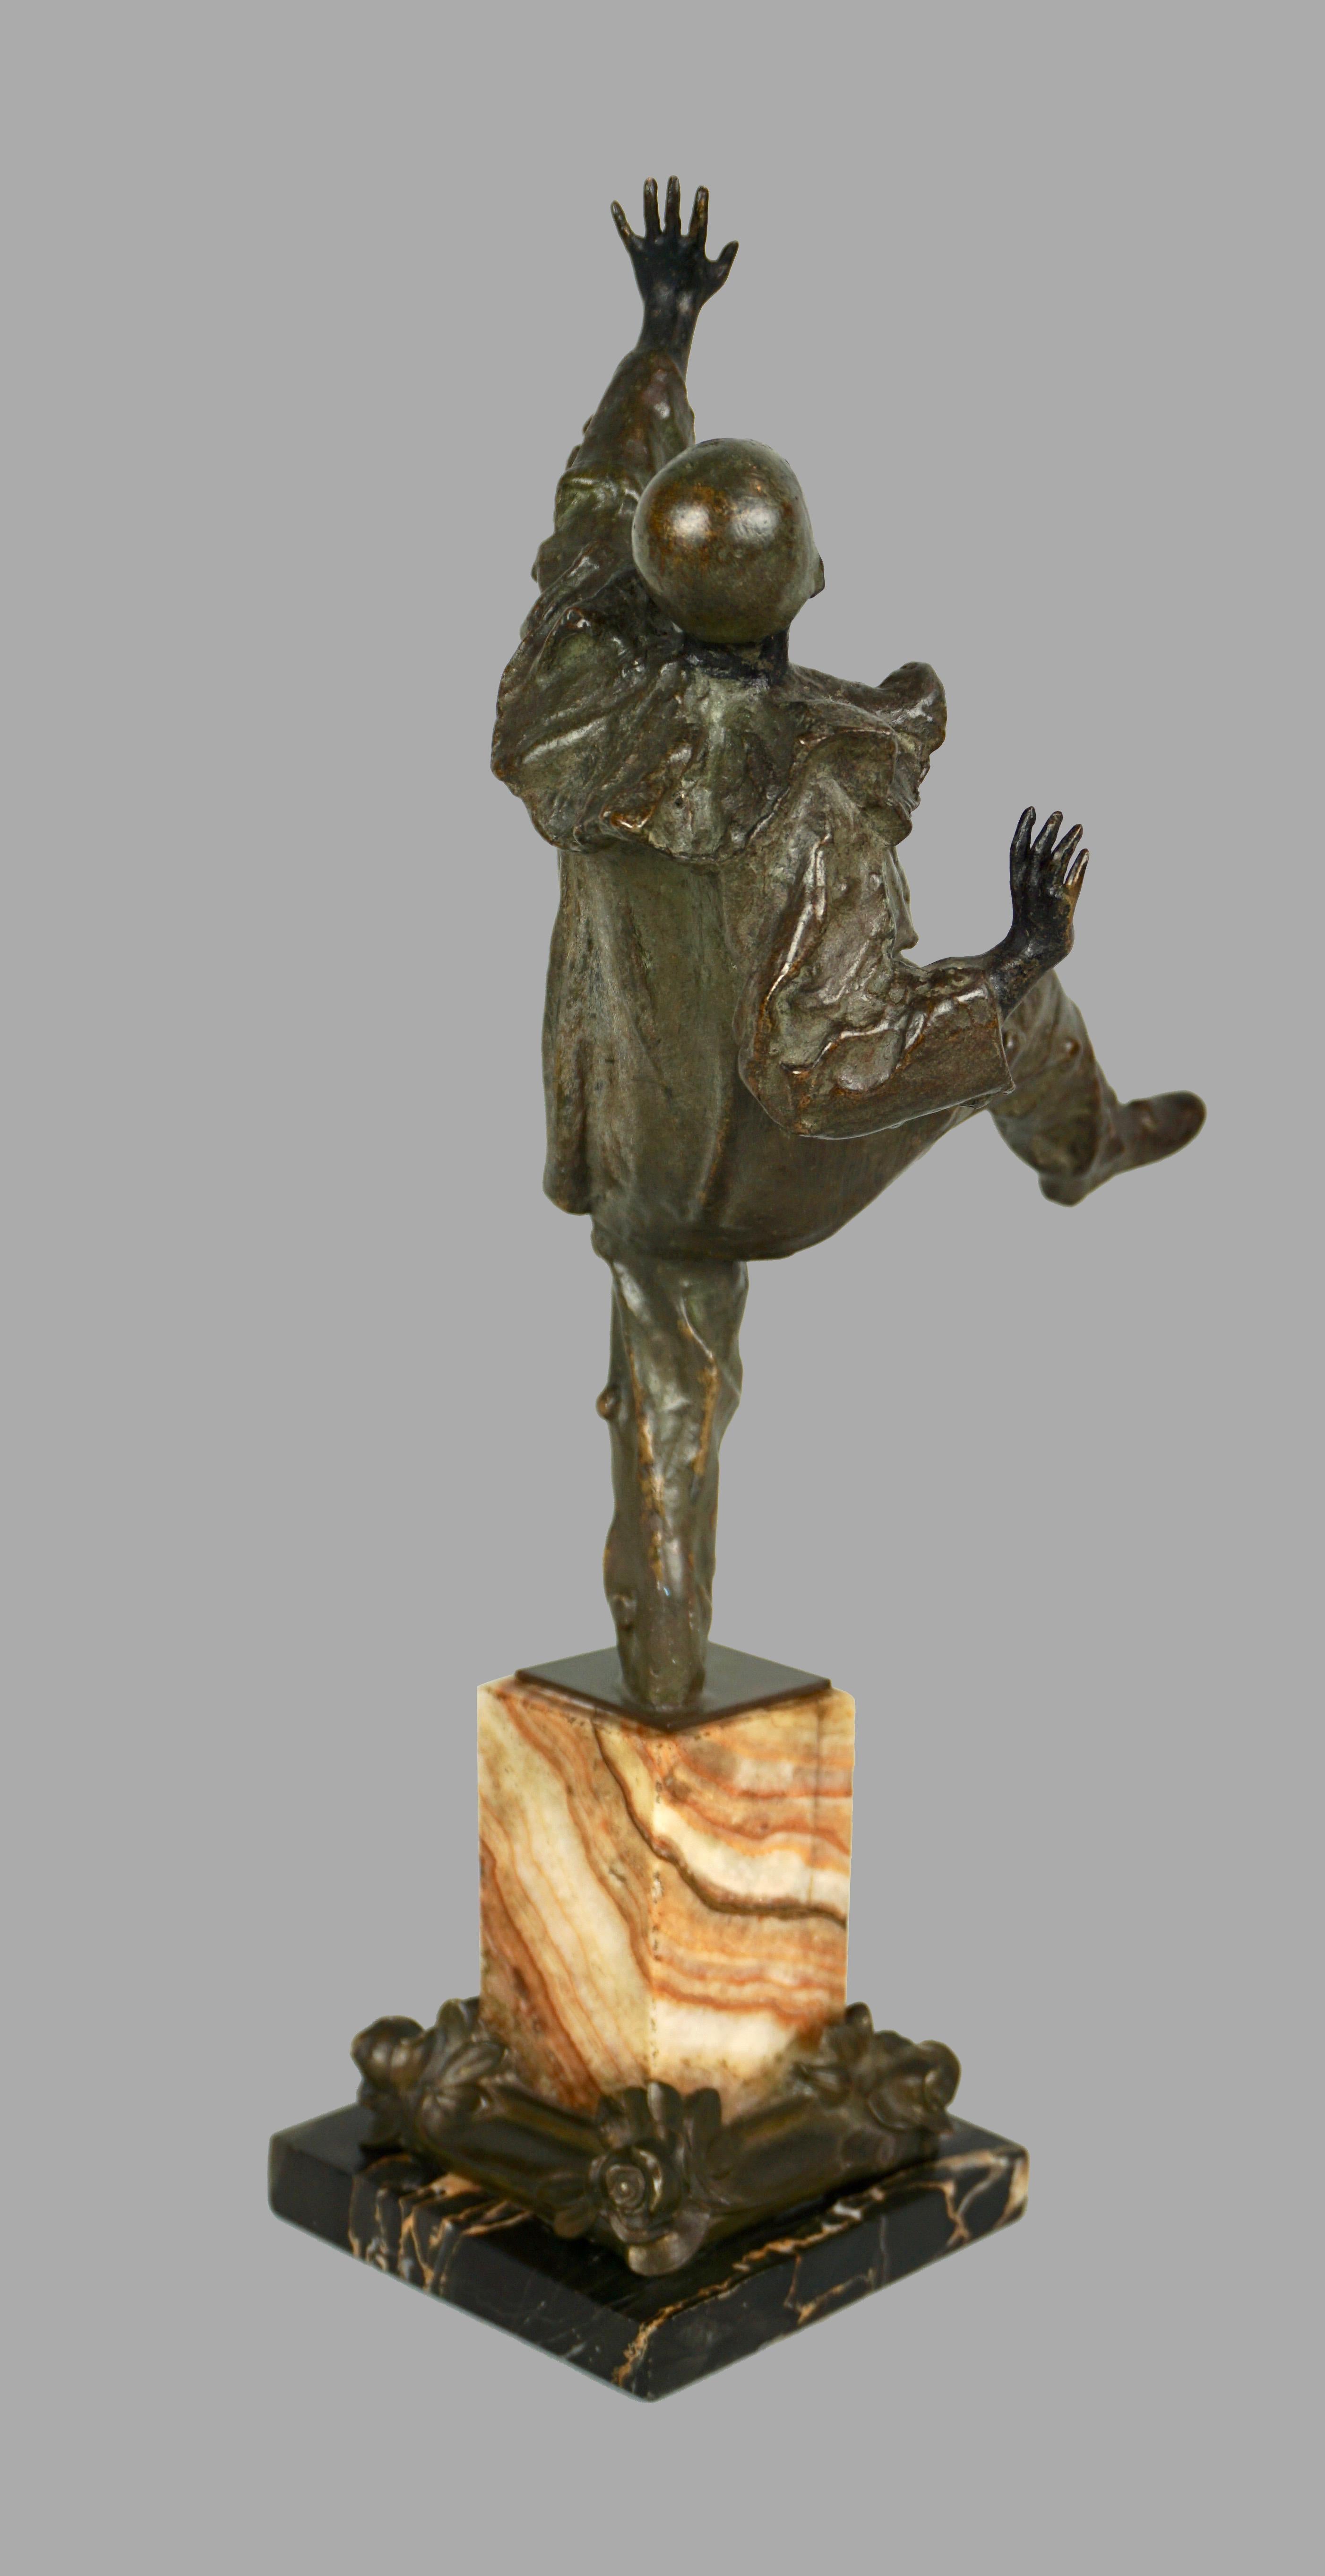 A charming and dynamic well-modeled bronze figure of a dancing harlequin or clown standing with one leg and arm in the air, fingers outstretched, dressed in a flowing garment and wearing a skull cap. Mounted on a 2 color marble base. Circa 1900.